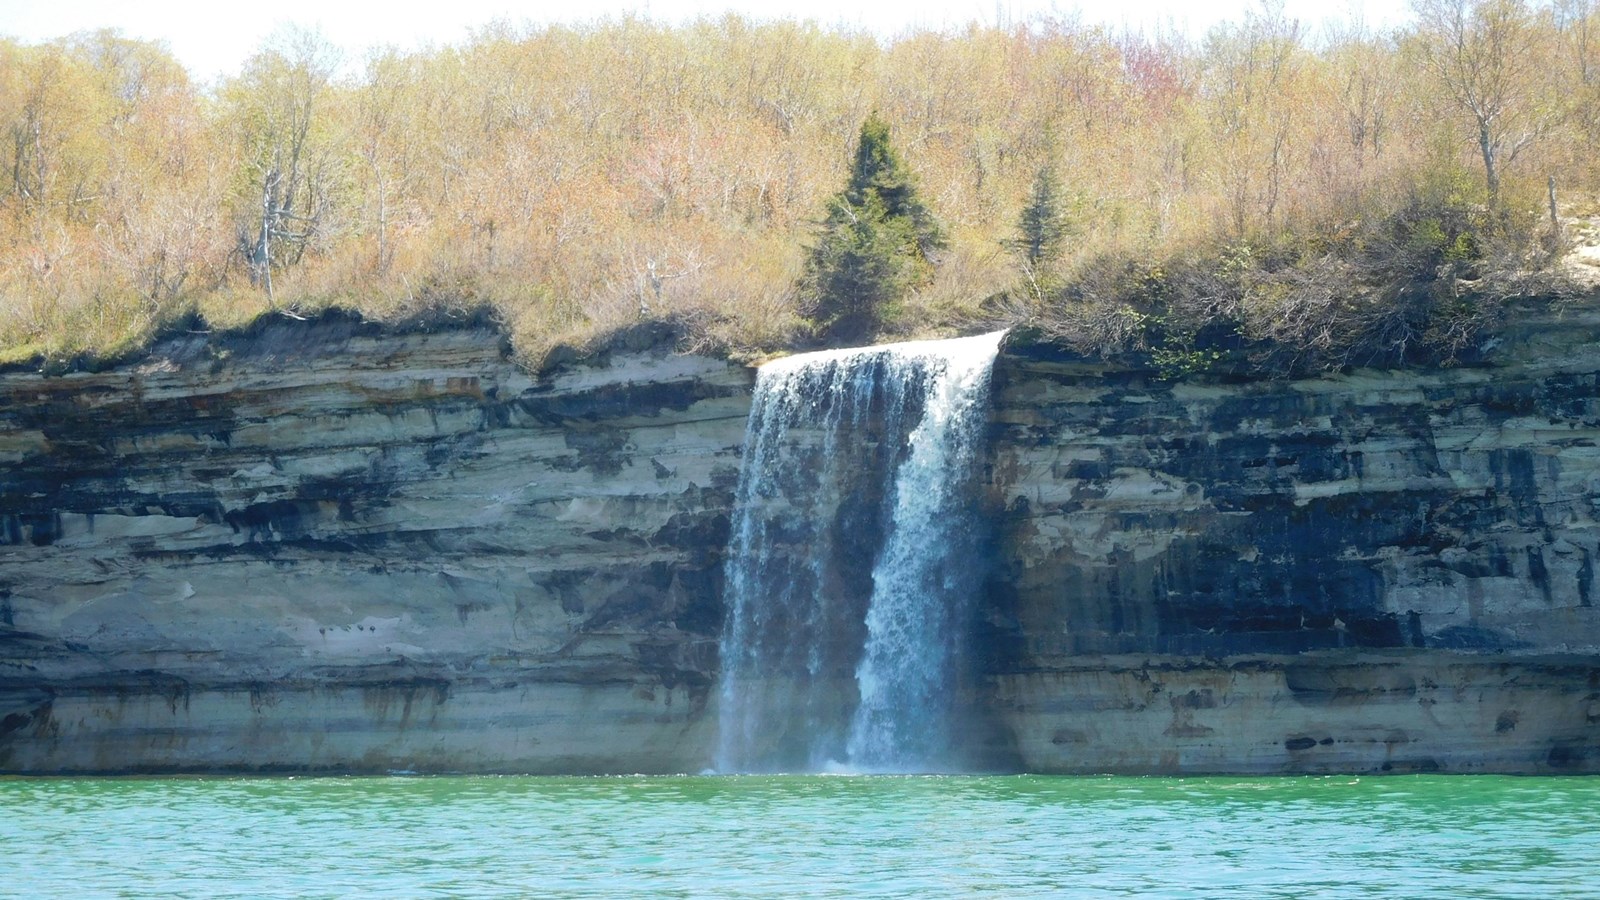 Spray Falls flows from the top of the cliff 70 feet into Lake Superior.